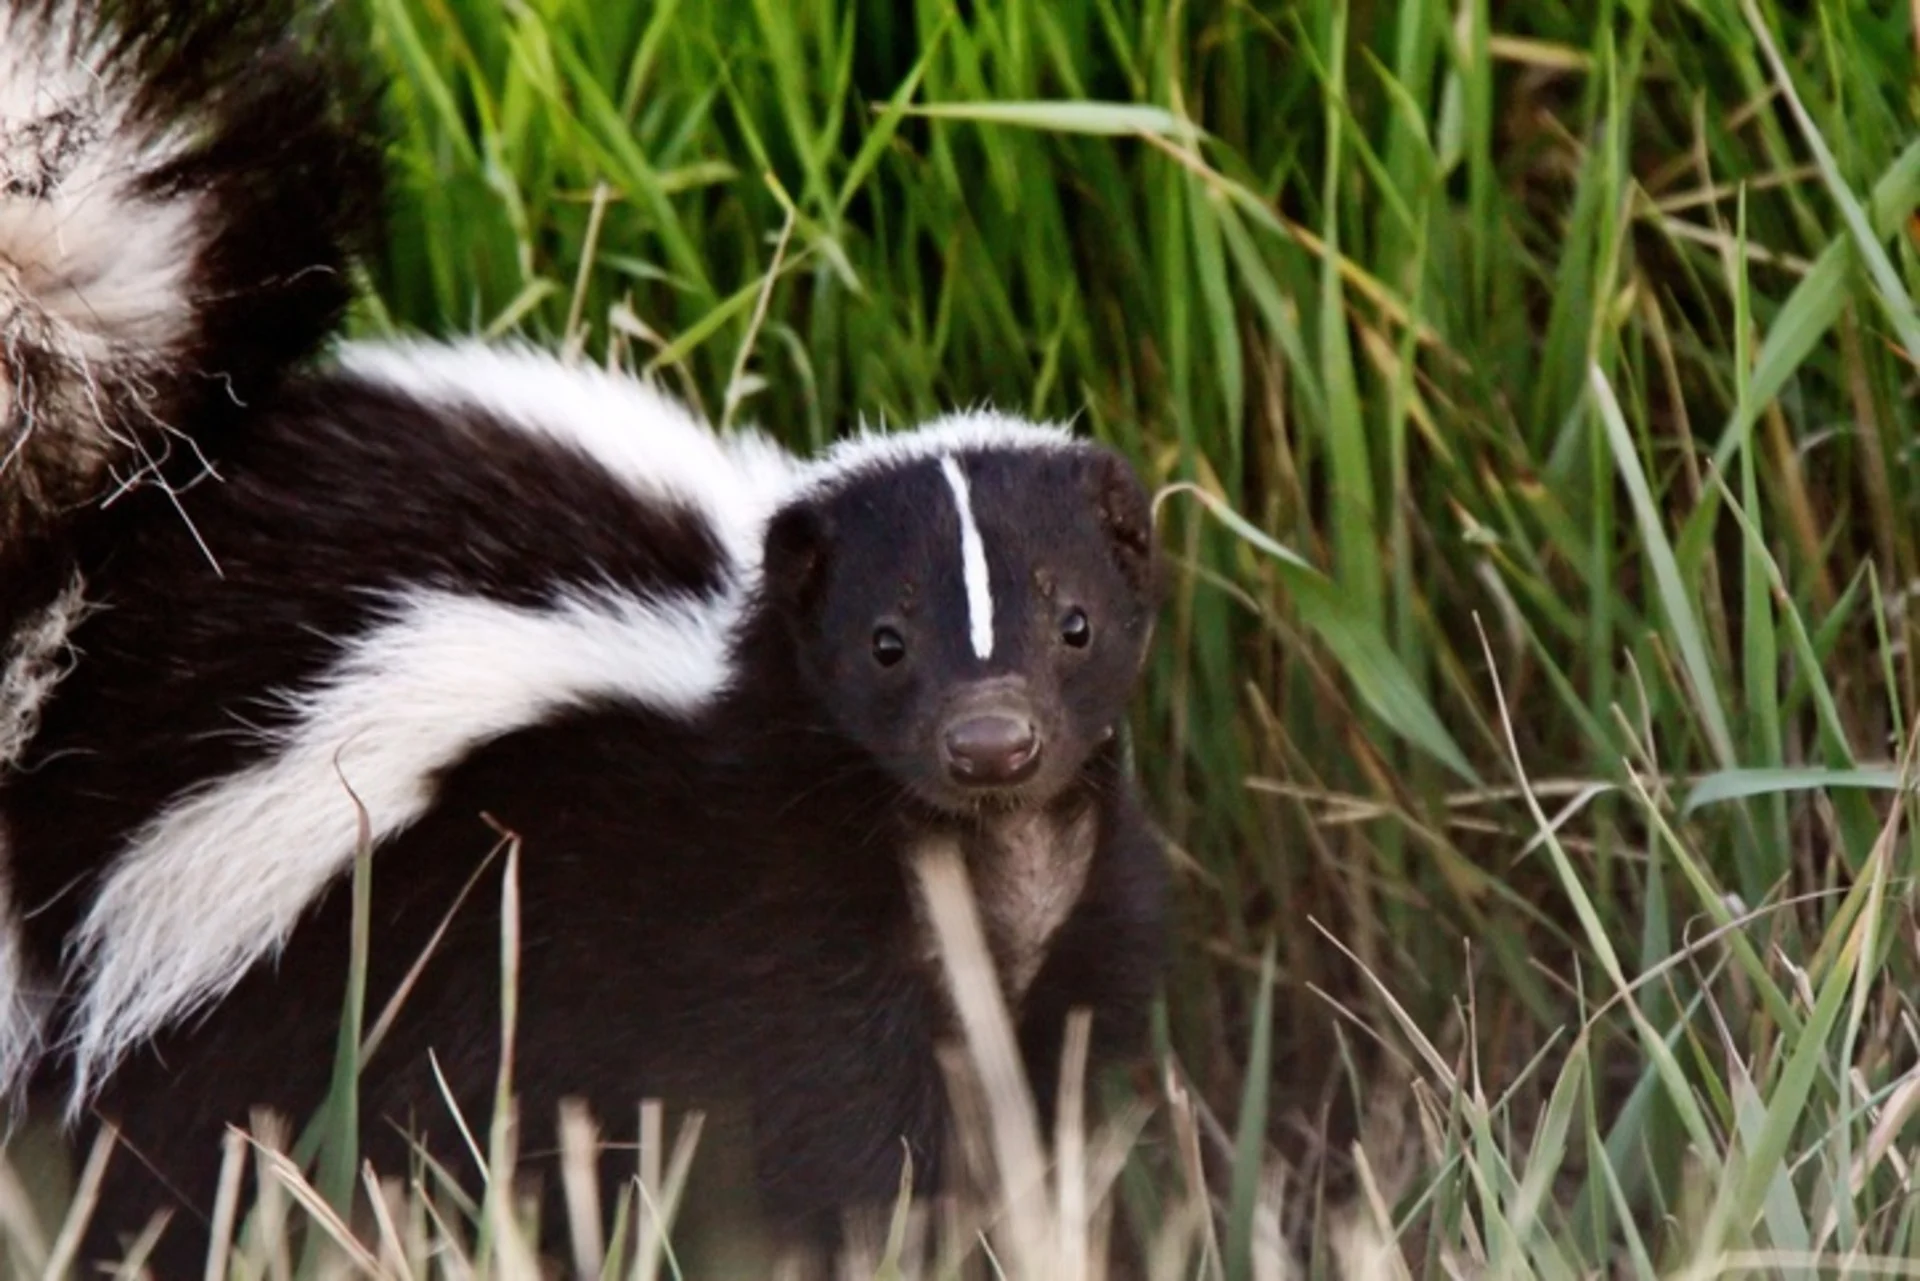 How to get rid of skunk smells, according to chemists